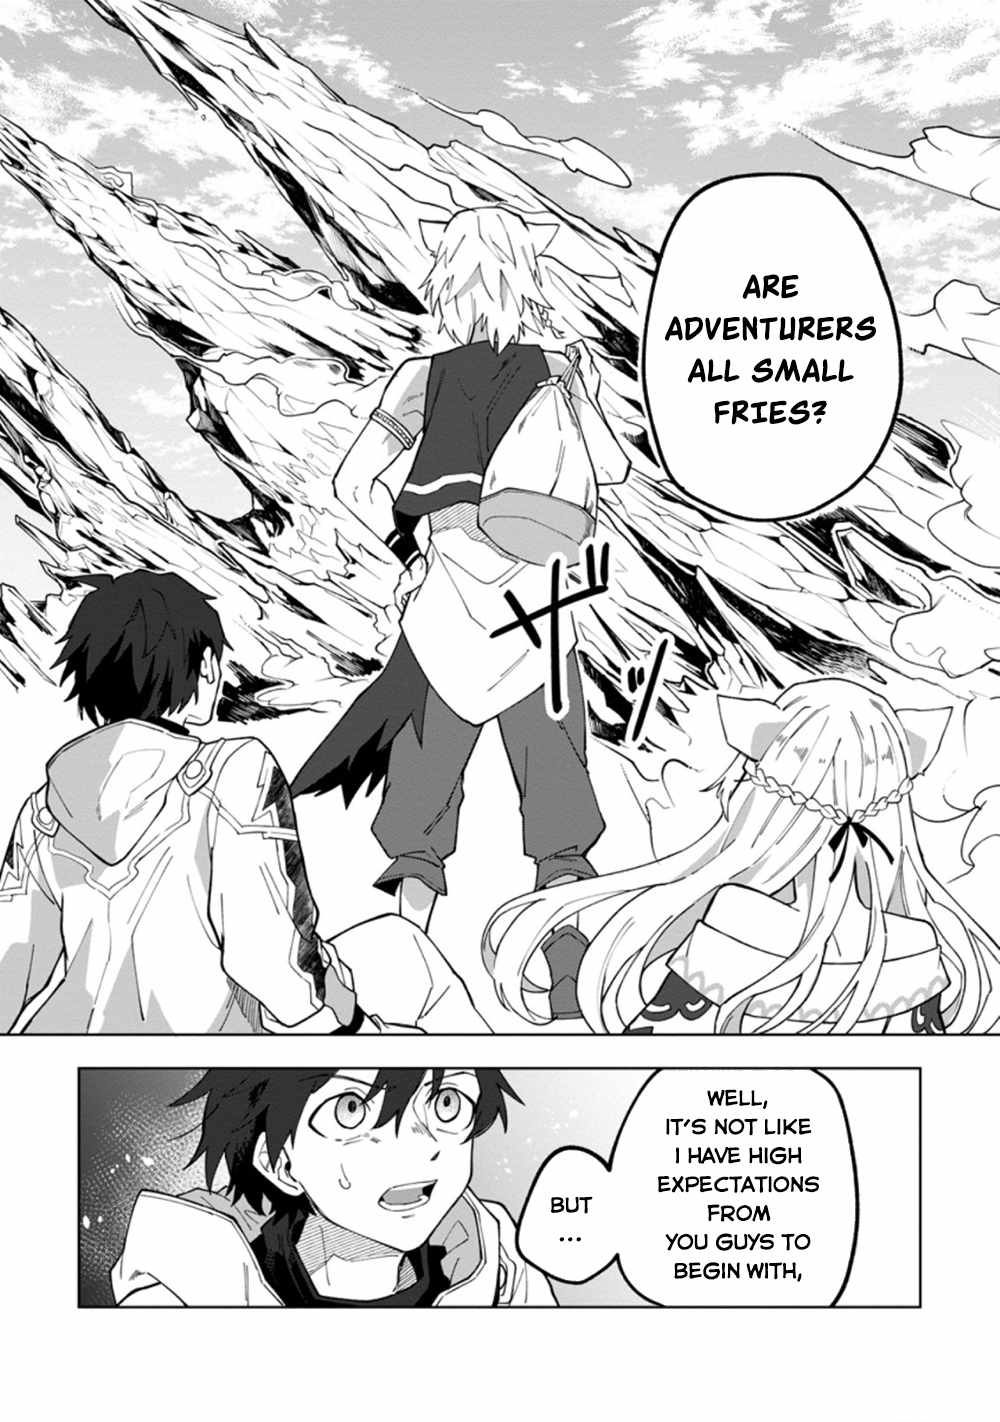 The White Mage Who Was Banished From the Hero's Party Is Picked up by an S Rank Adventurer ~ This White Mage Is Too Out of the Ordinary! Chapter 16-2-eng-li - Page 6